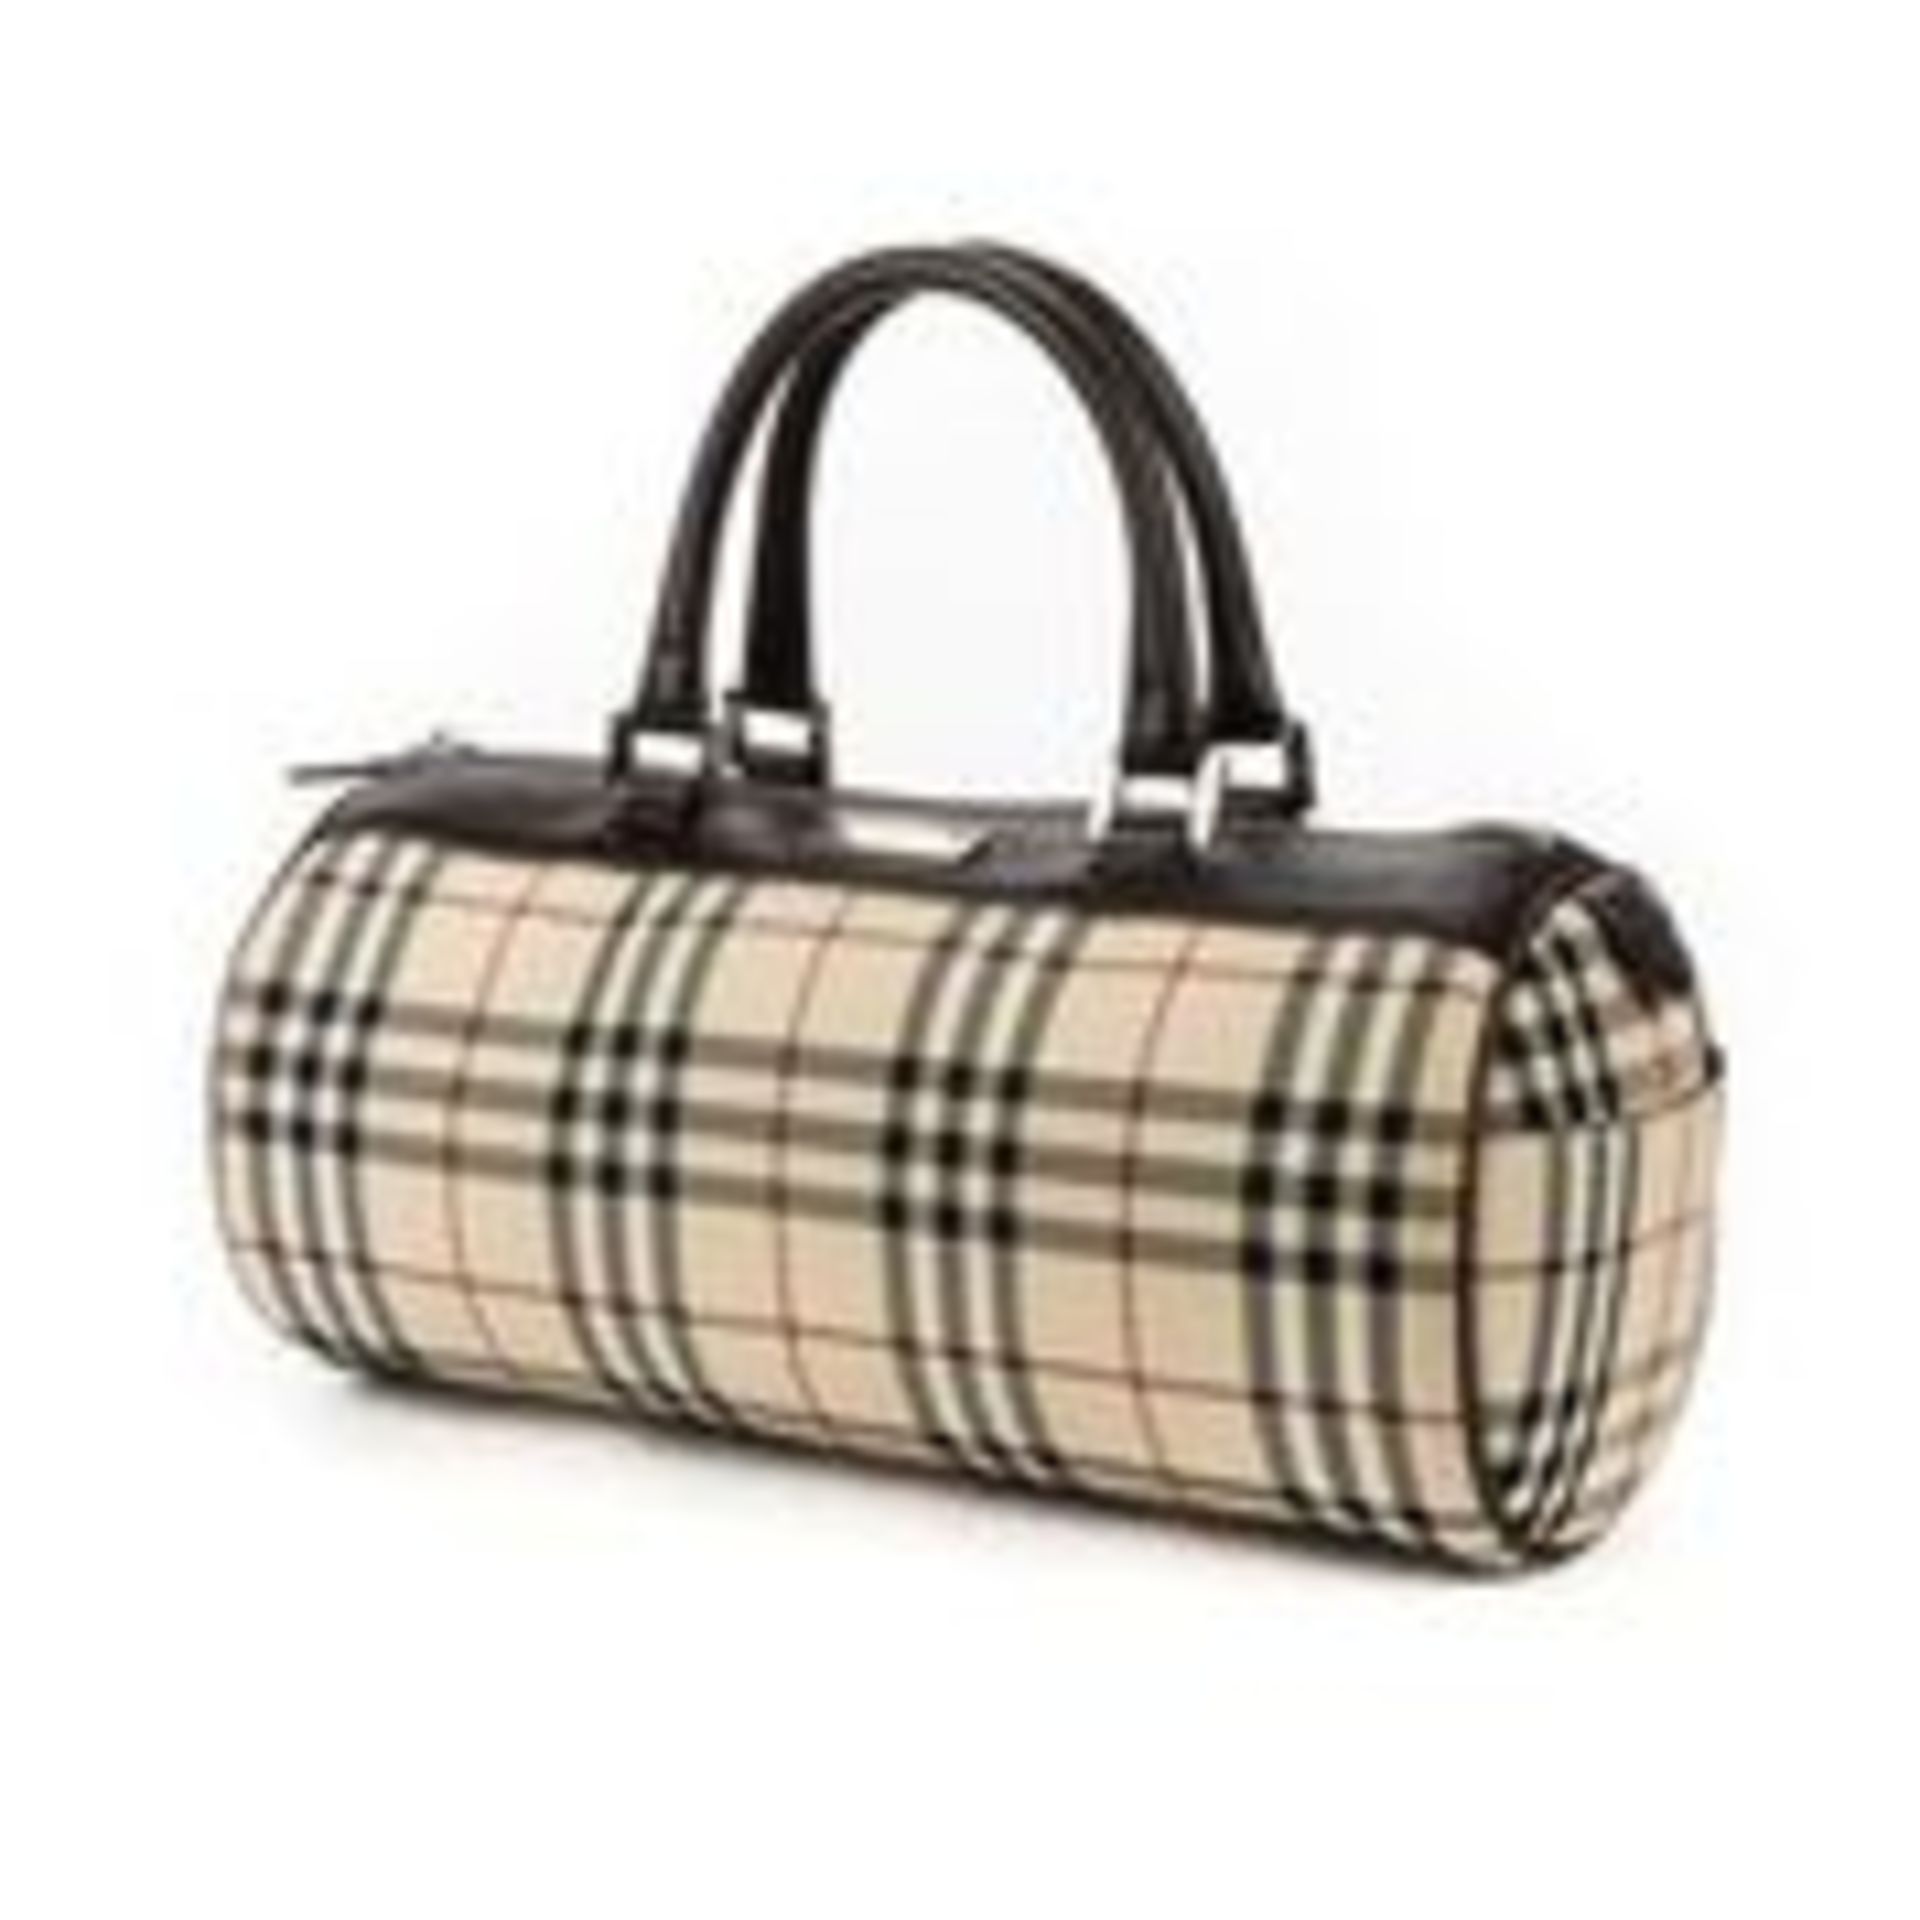 RRP £890 Burberry Roll Hand Bag in Beige AAP2460 - Grade AA Please Contact Us Directly For